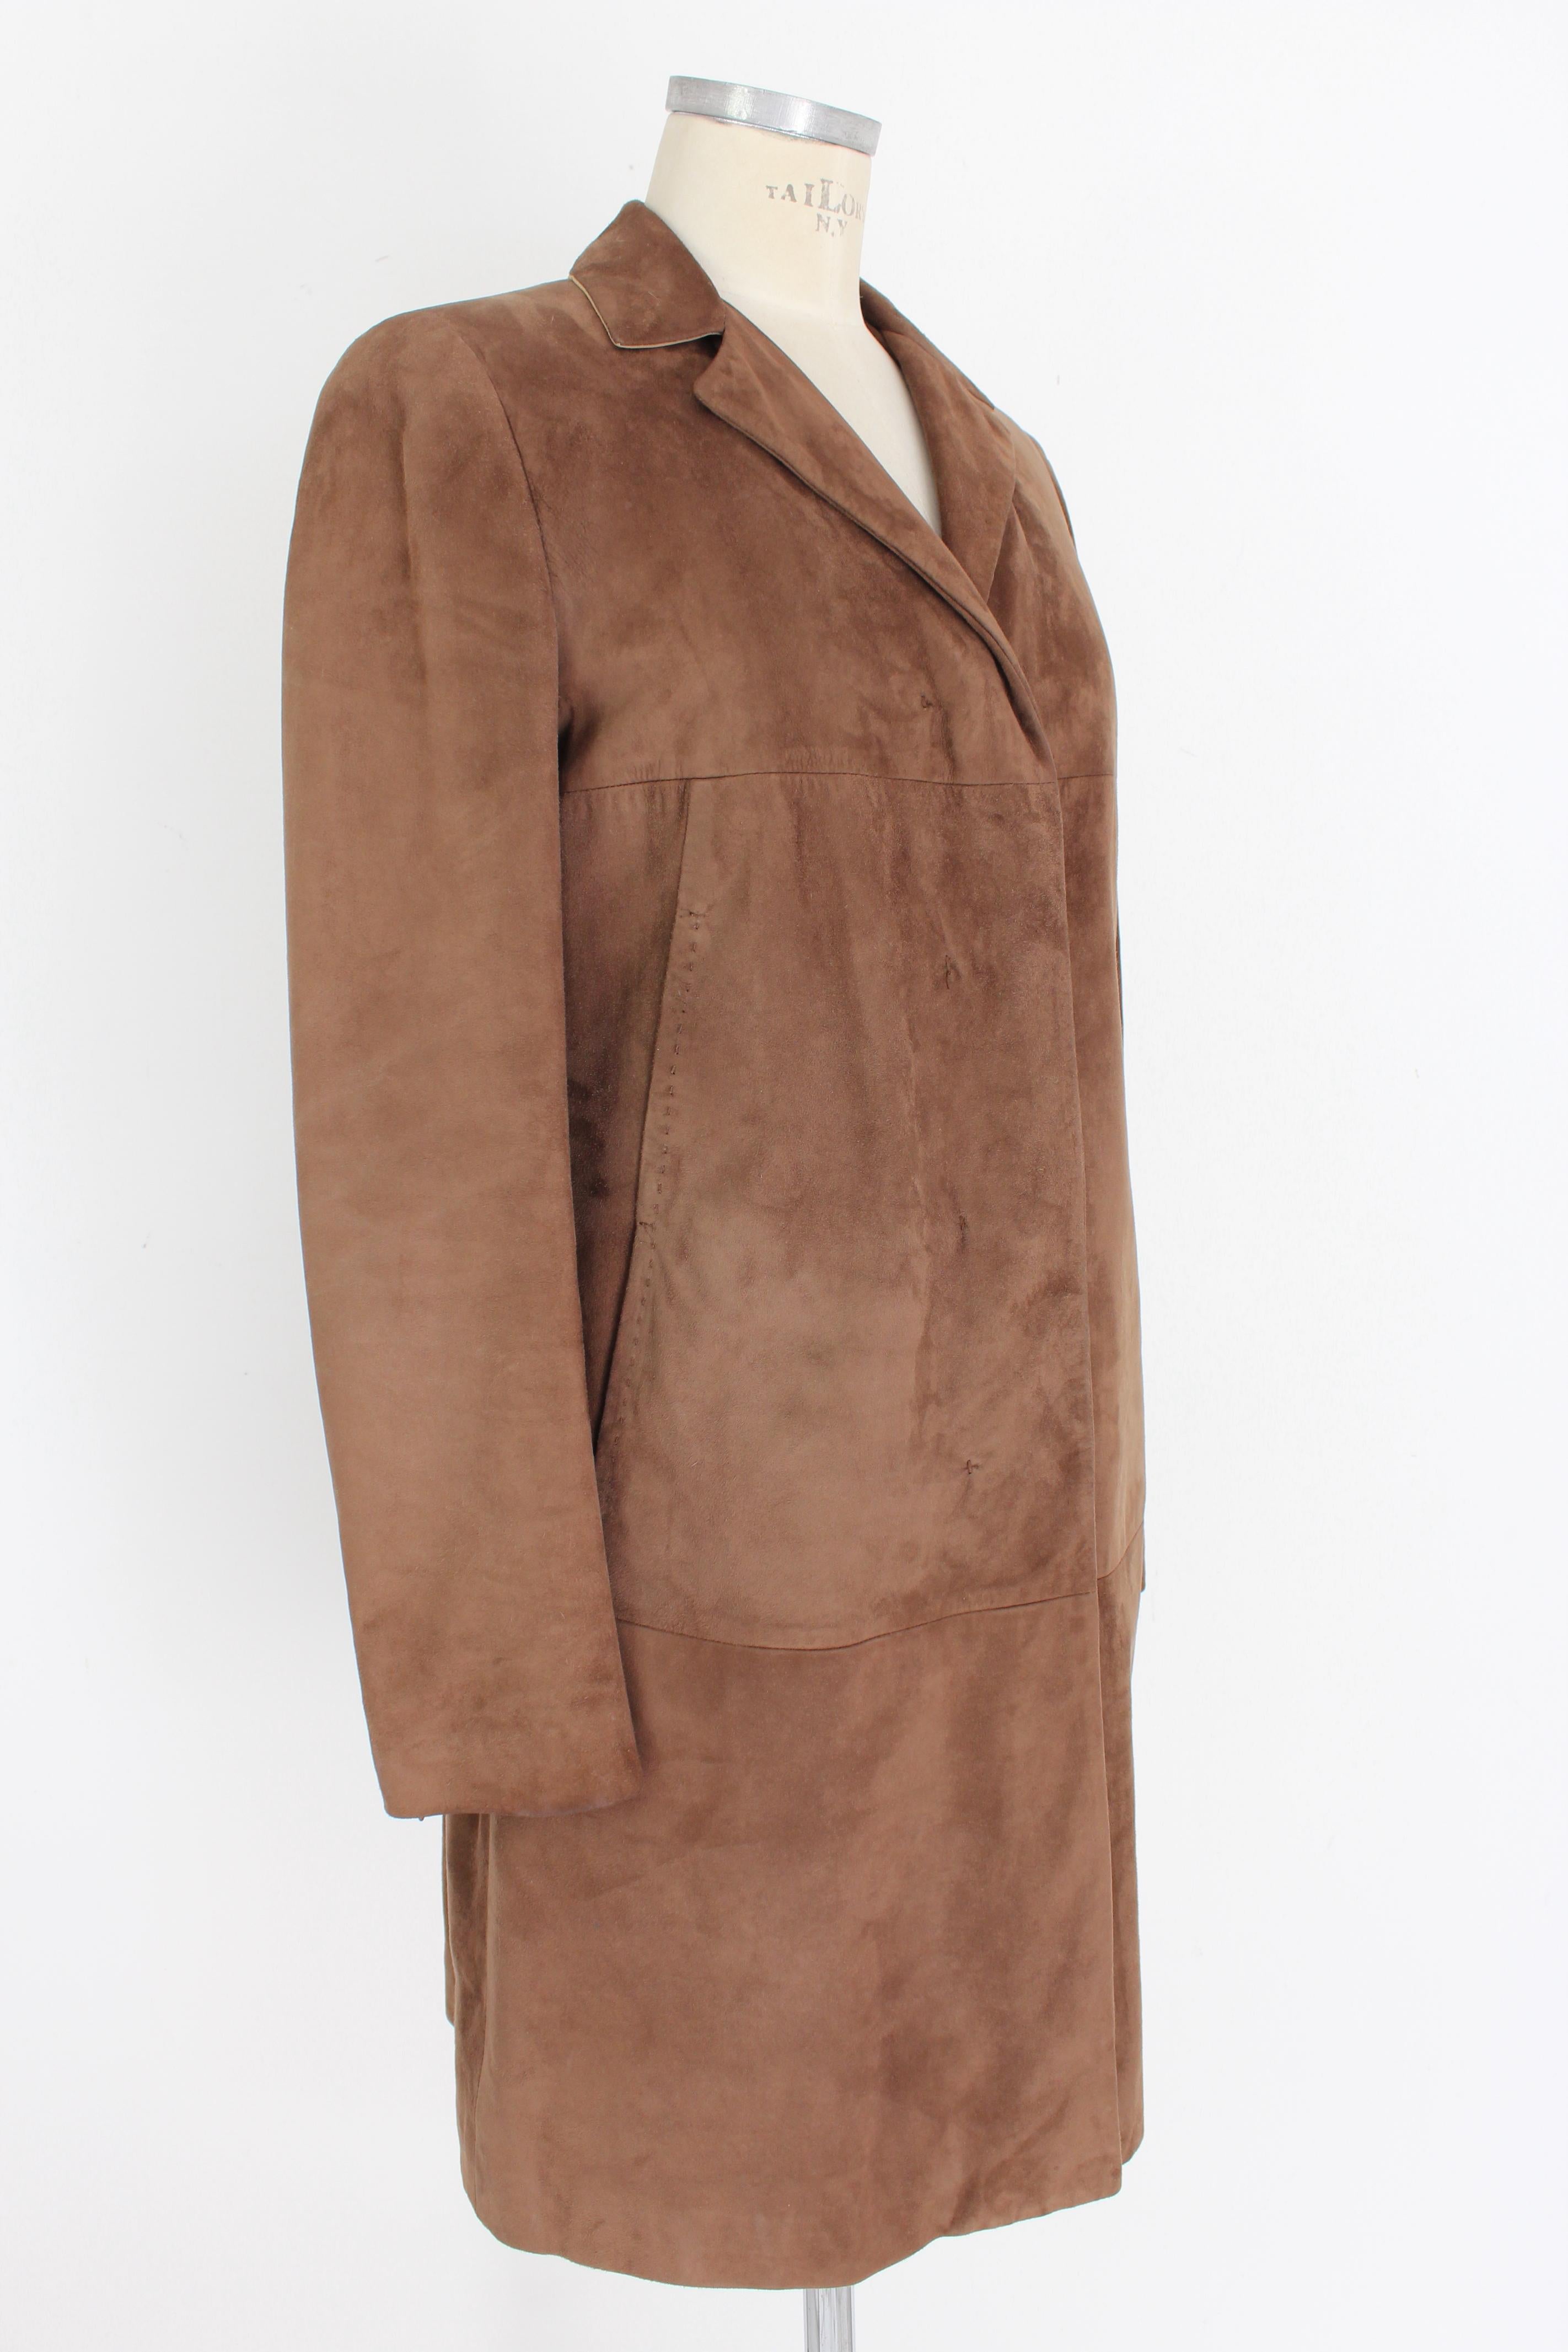 Vtg STRAN IDEA Brown Leather Jacket Coat Made in Italy